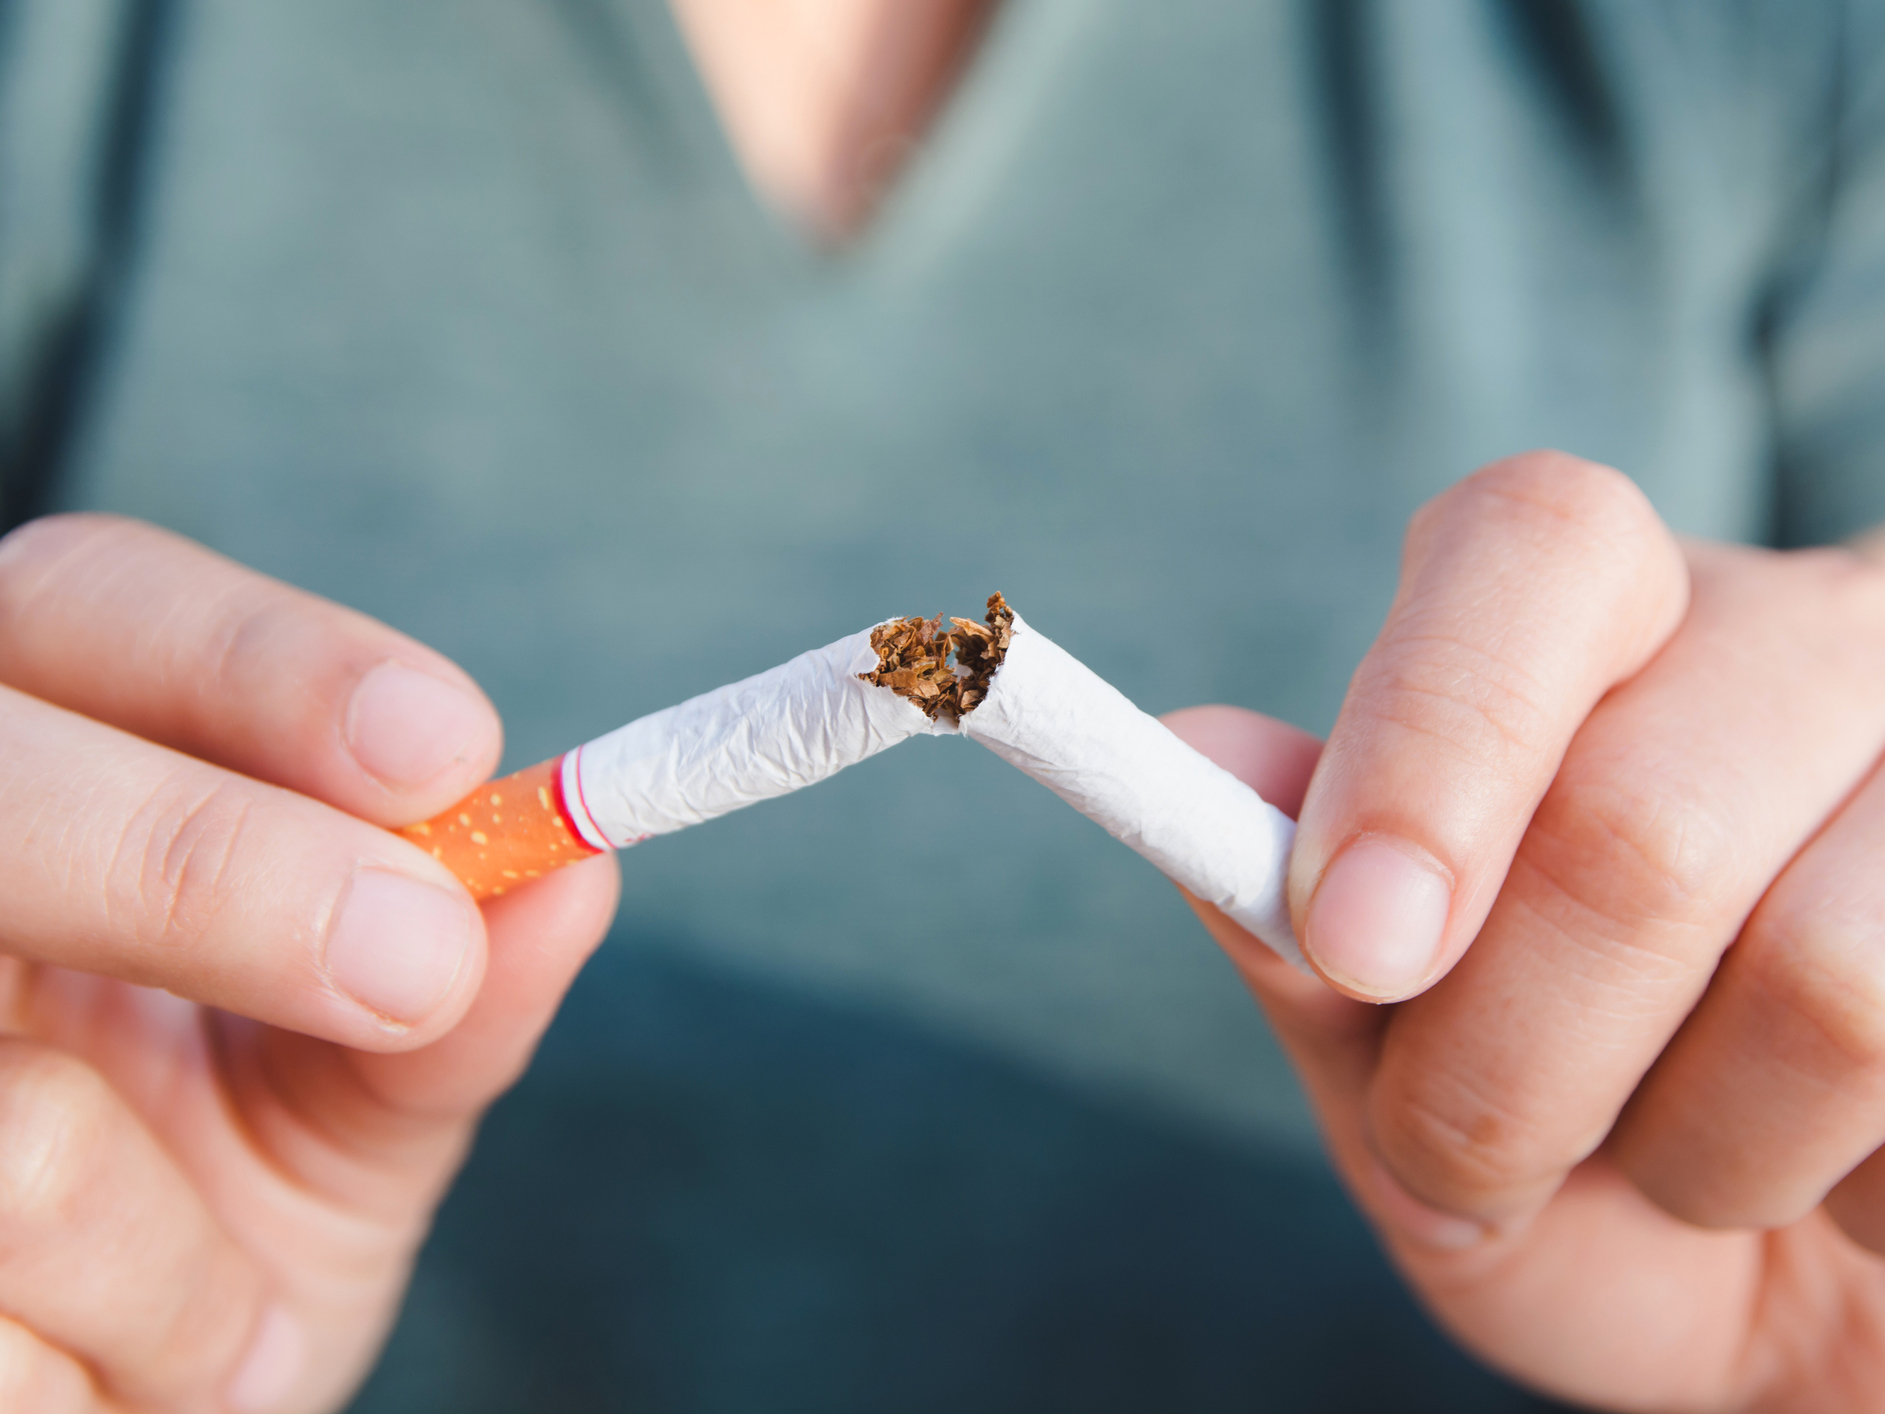 How to make quitting smoking almost 6 times more successful